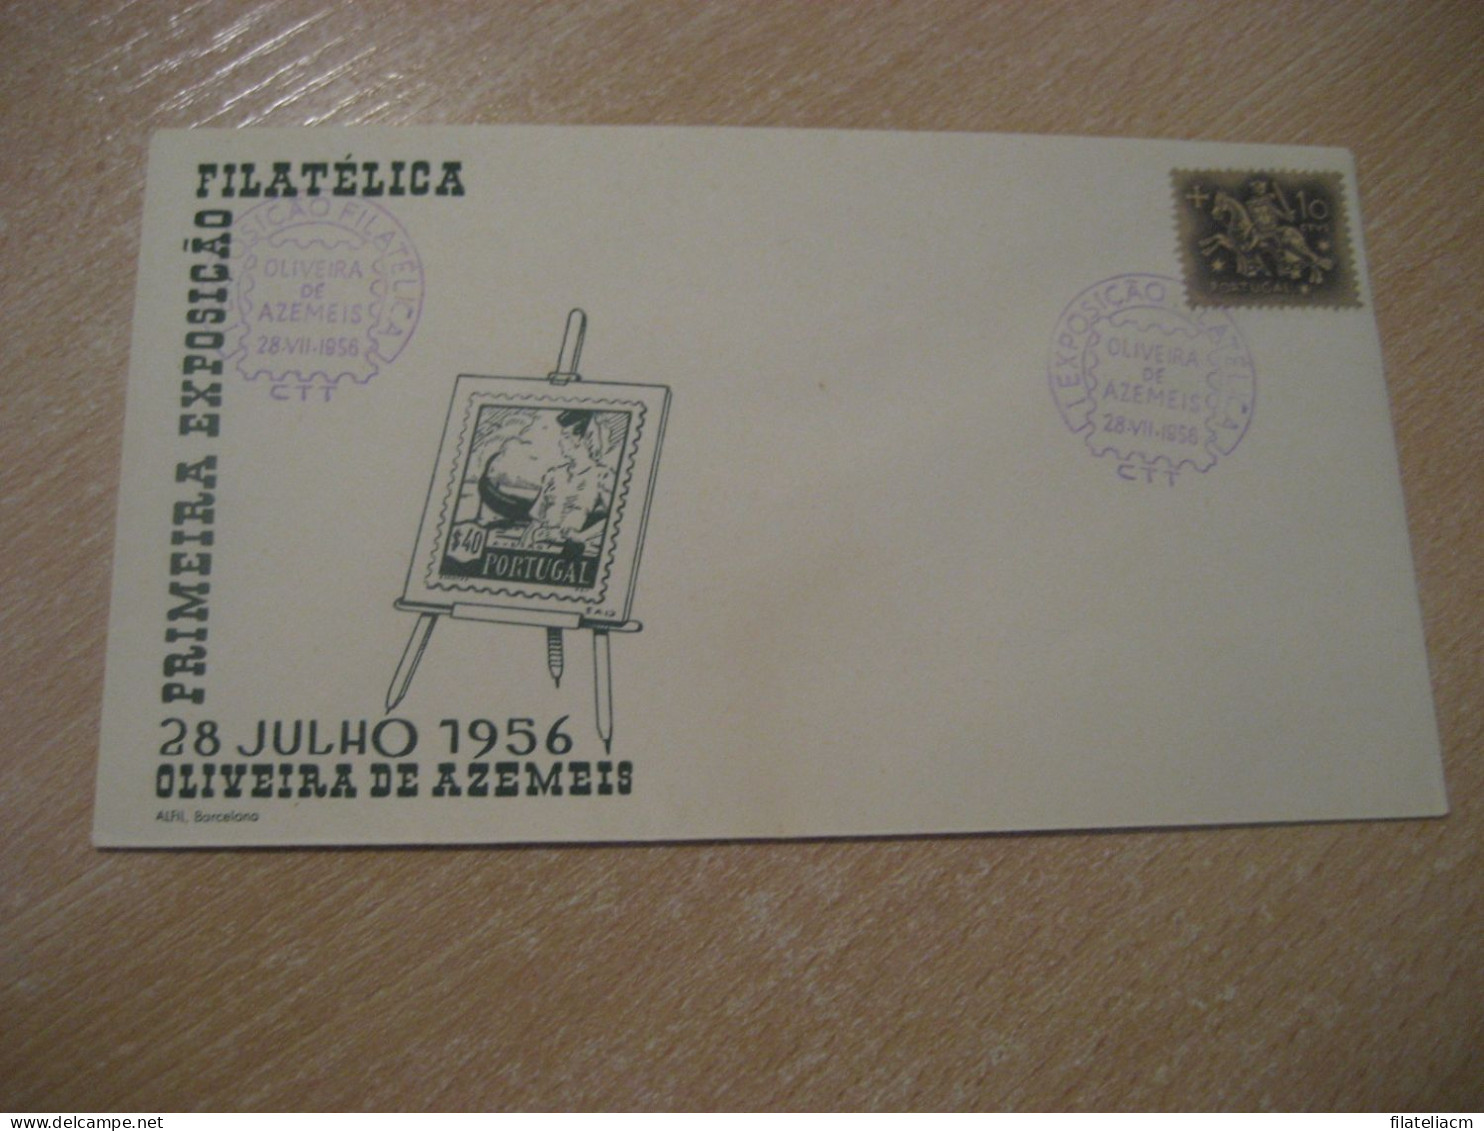 OLIVEIRA DE AZEMEIS 1956 Expo Filatelica Cancel Cover PORTUGAL - Covers & Documents